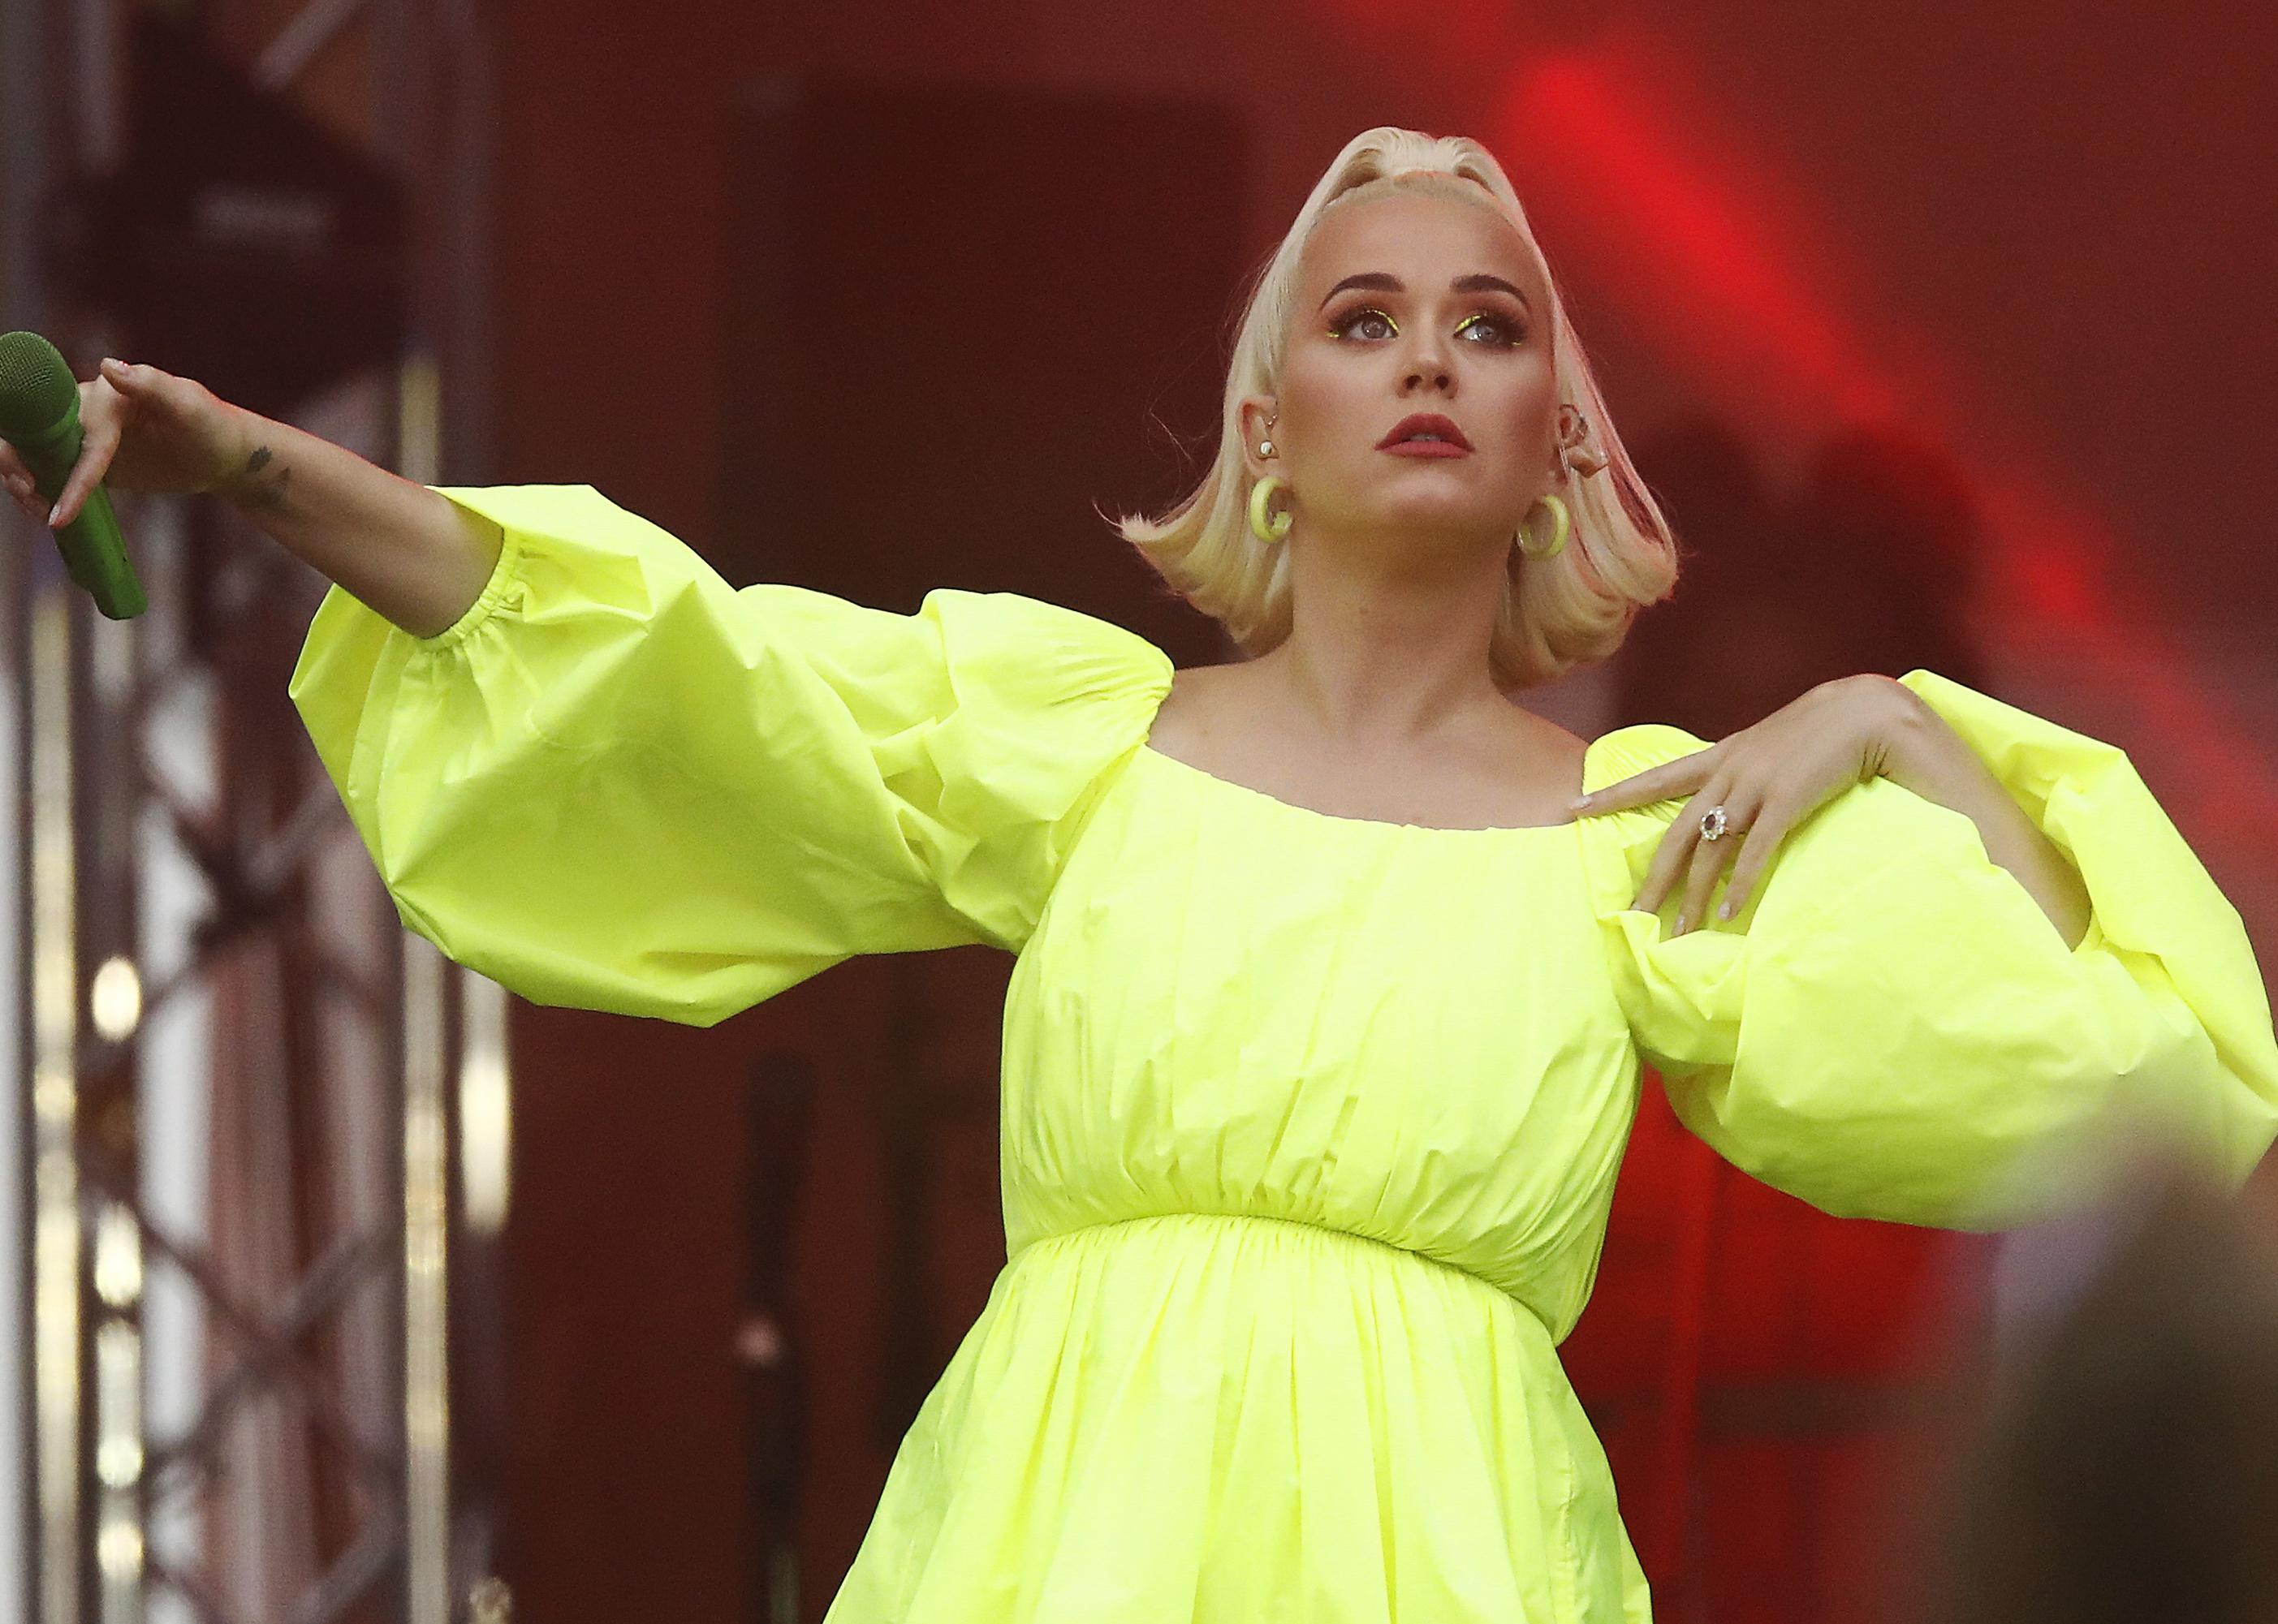 Katy Perry performing in a bright yellow dress on stage.